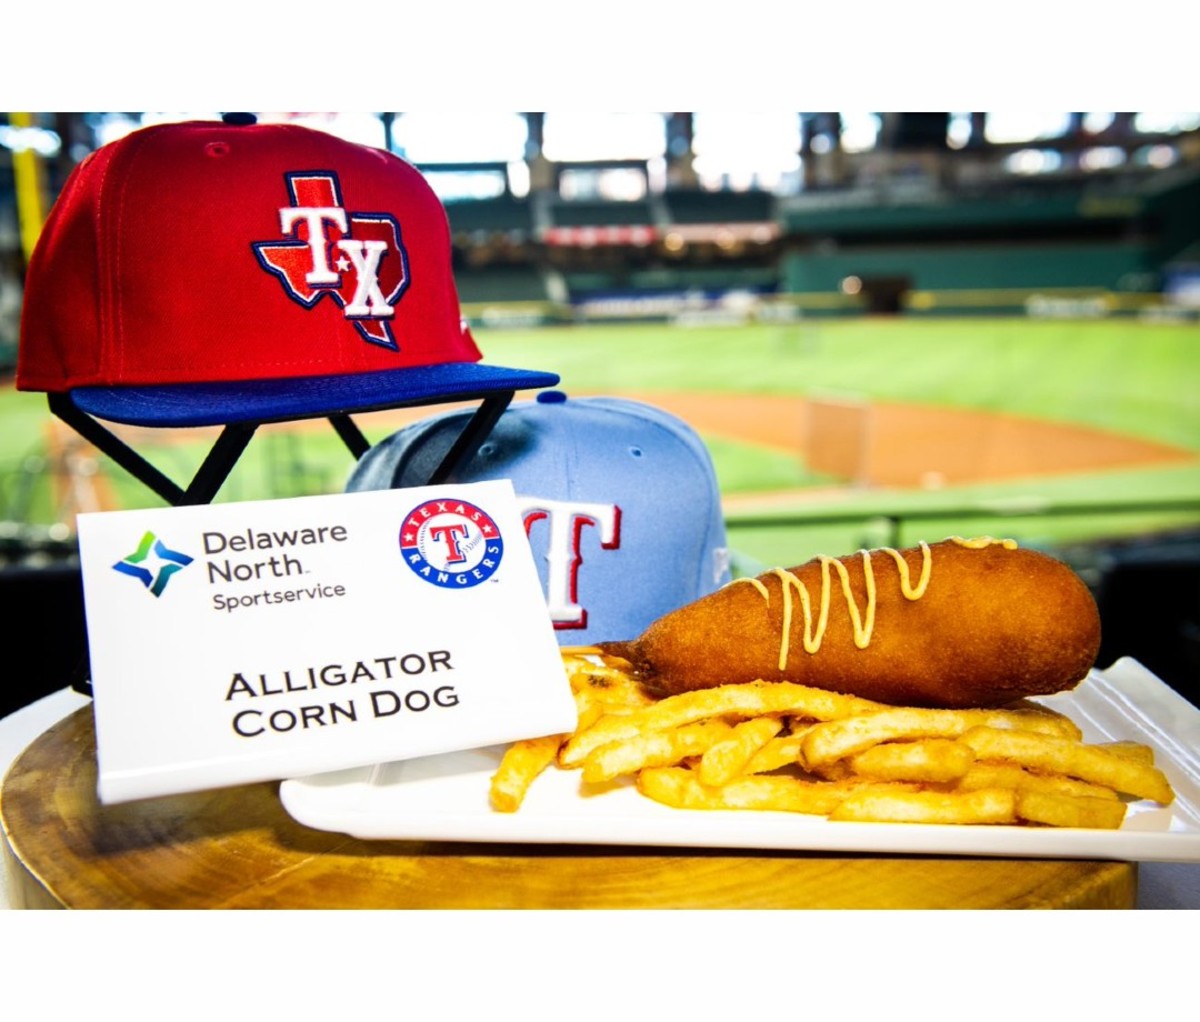 Finest Food to Order at Major League Baseball Stadiums